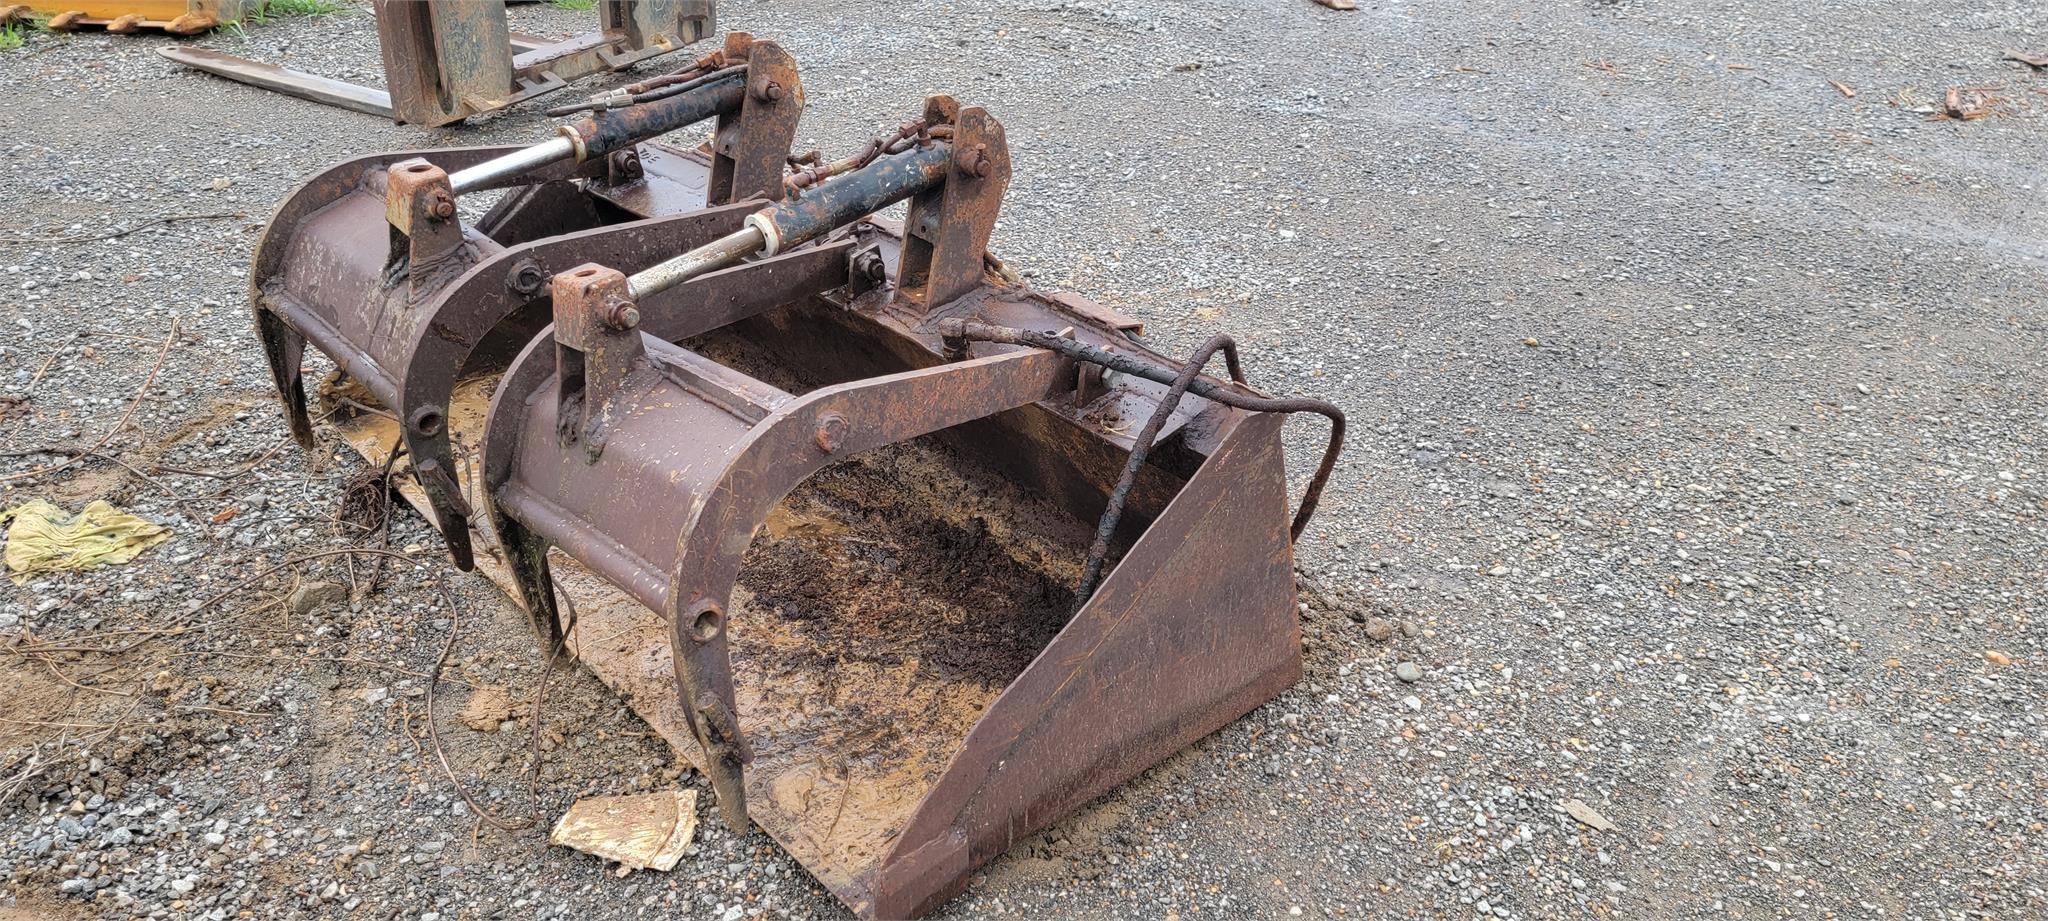 NEW/UNUSED HAY BALE GRAPPLING HOOK Farm Attachments Auction Results